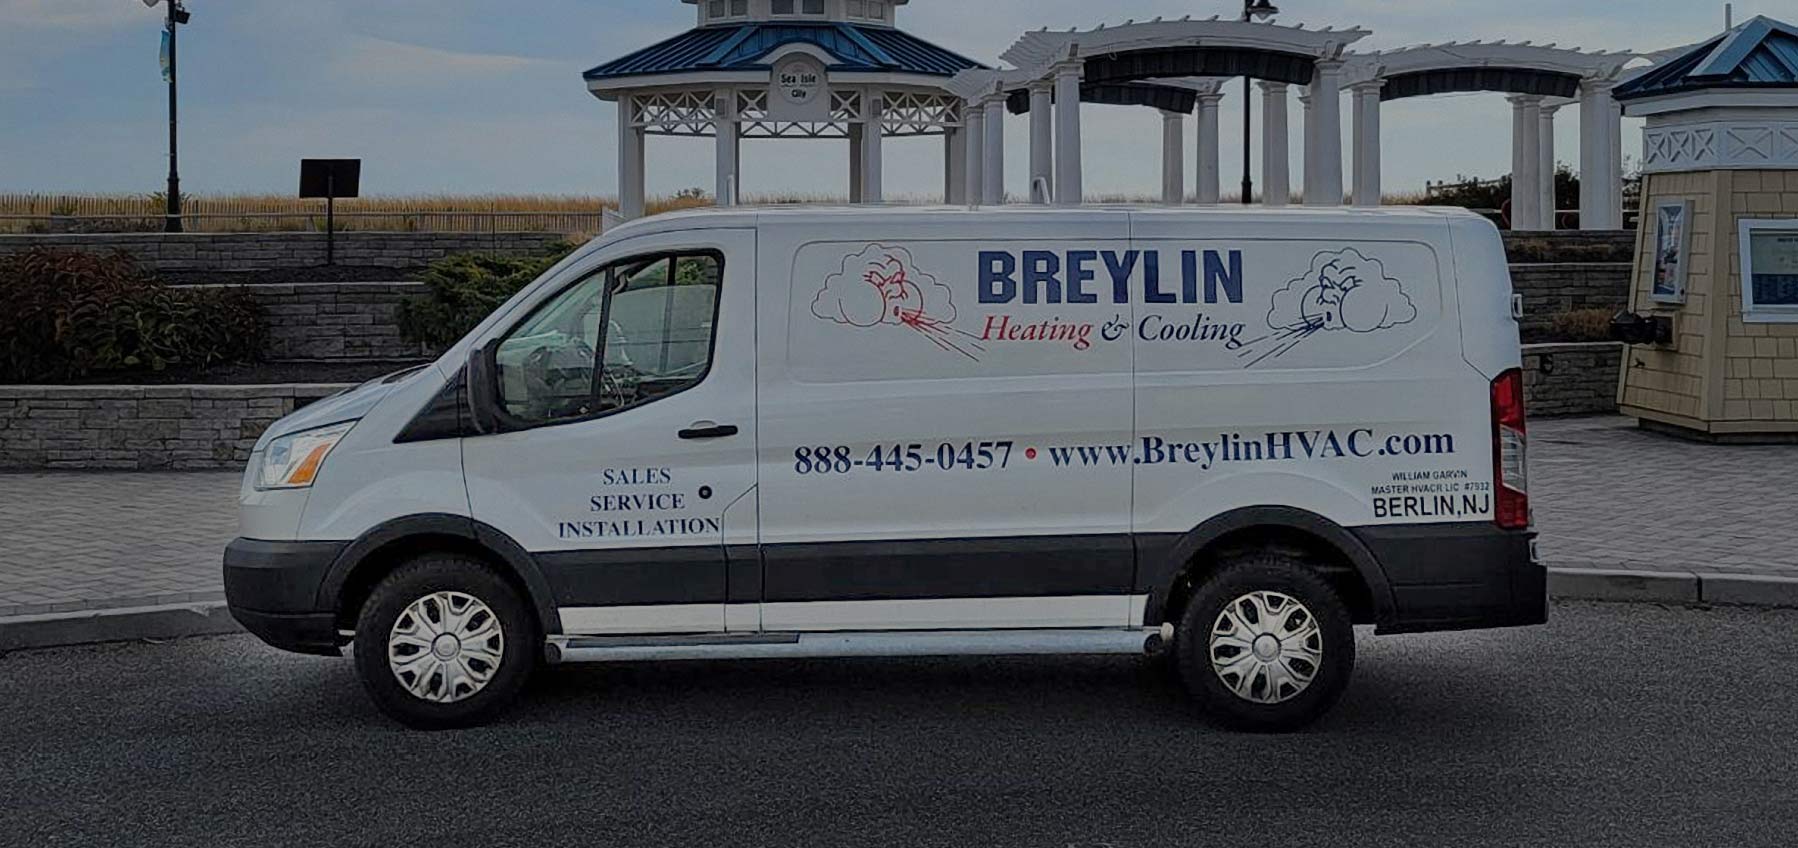 Breylin Heating & Cooling | Cape May County NJ Heater Air Conditioner HVAC Service